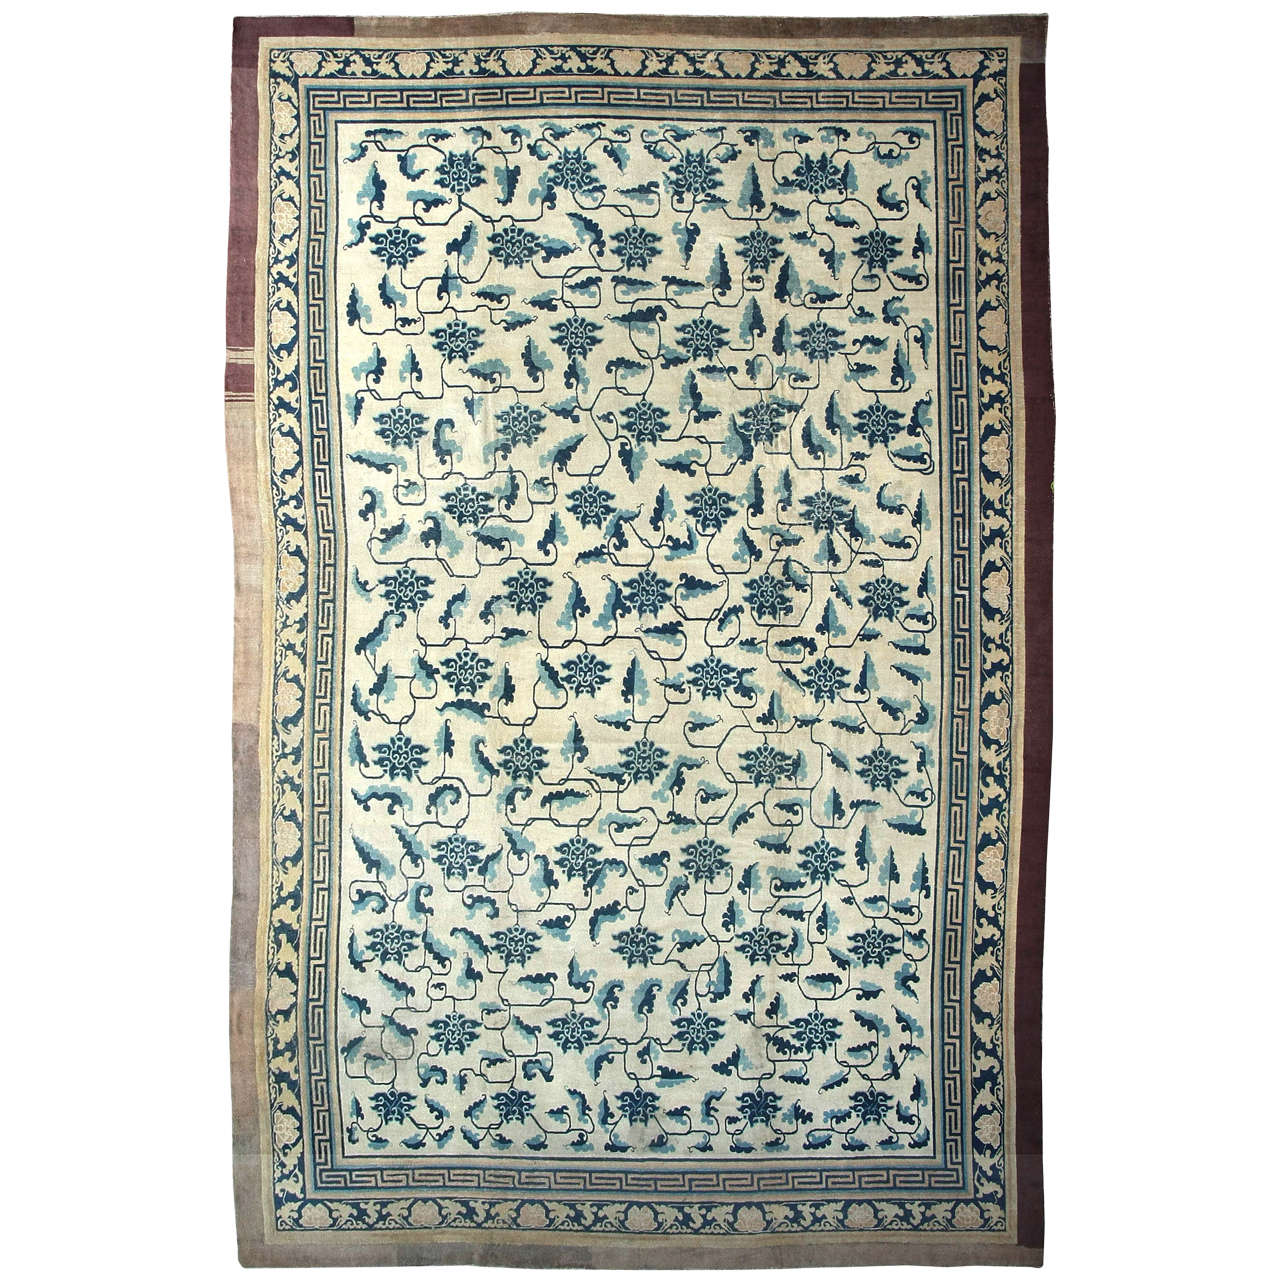 Early Chinese Carpet with Stylized Lotus Flowers and Leaf Stems